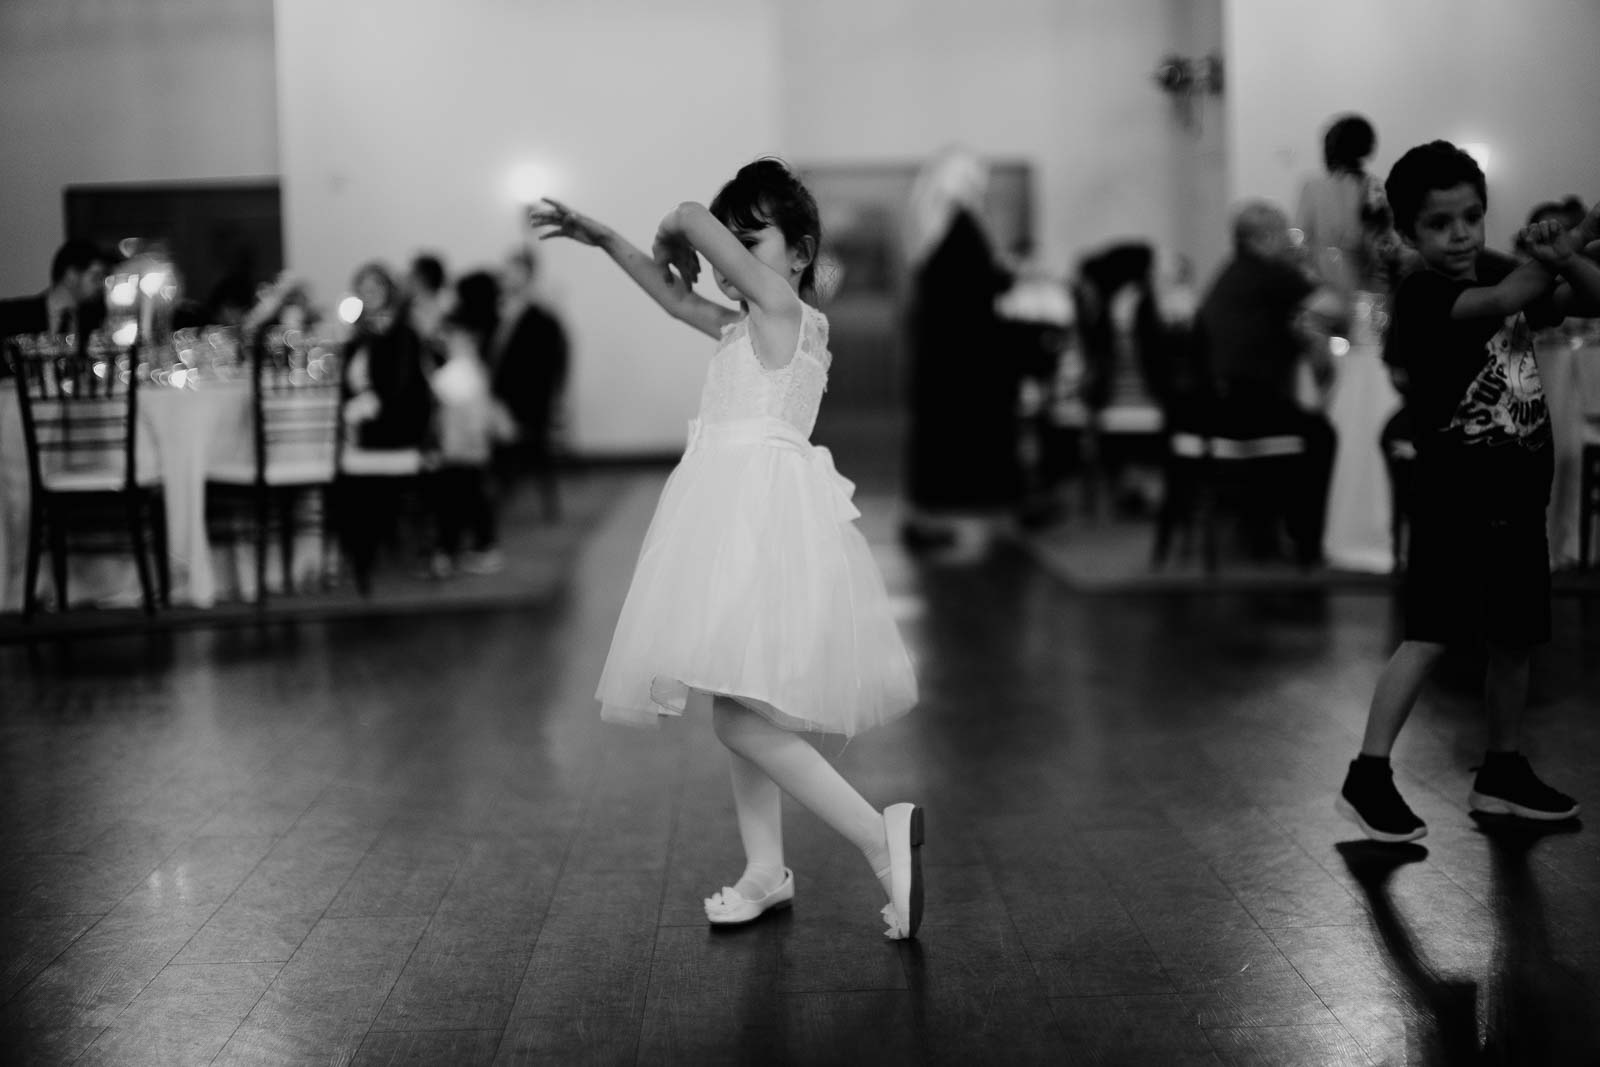 A flowrgirl girl dances at the reception